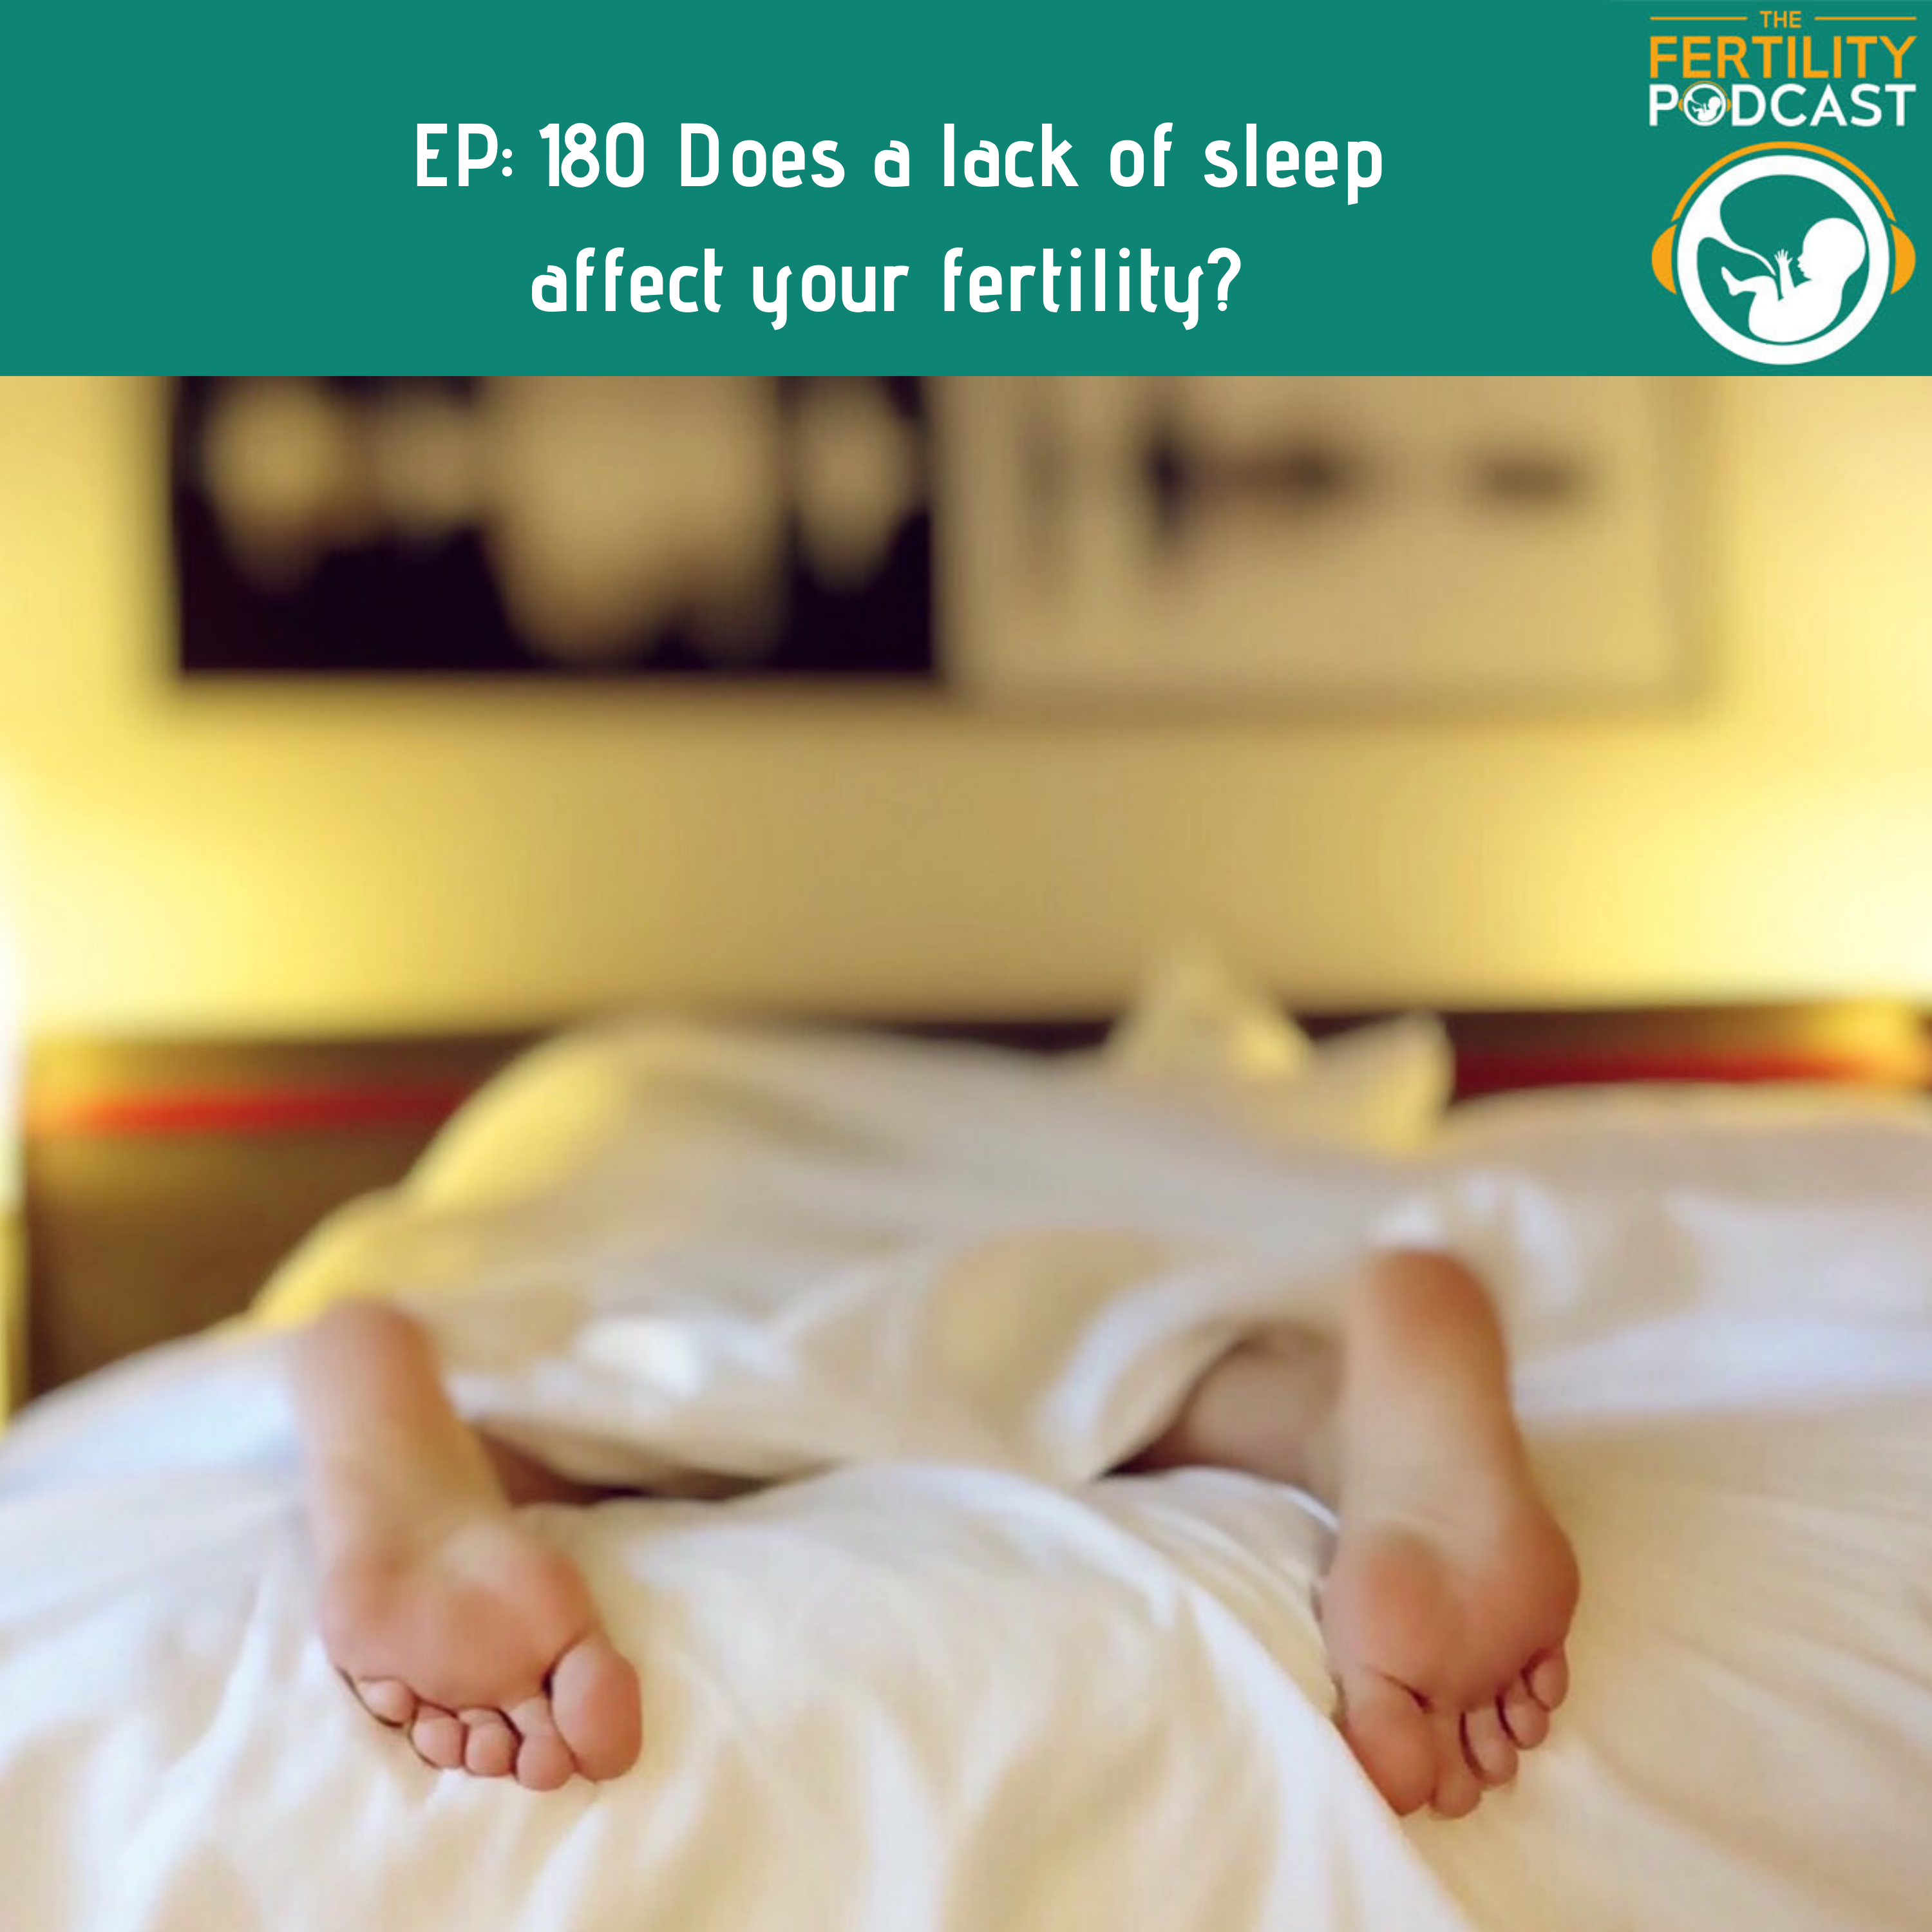 Does a lack of sleep affect my fertility